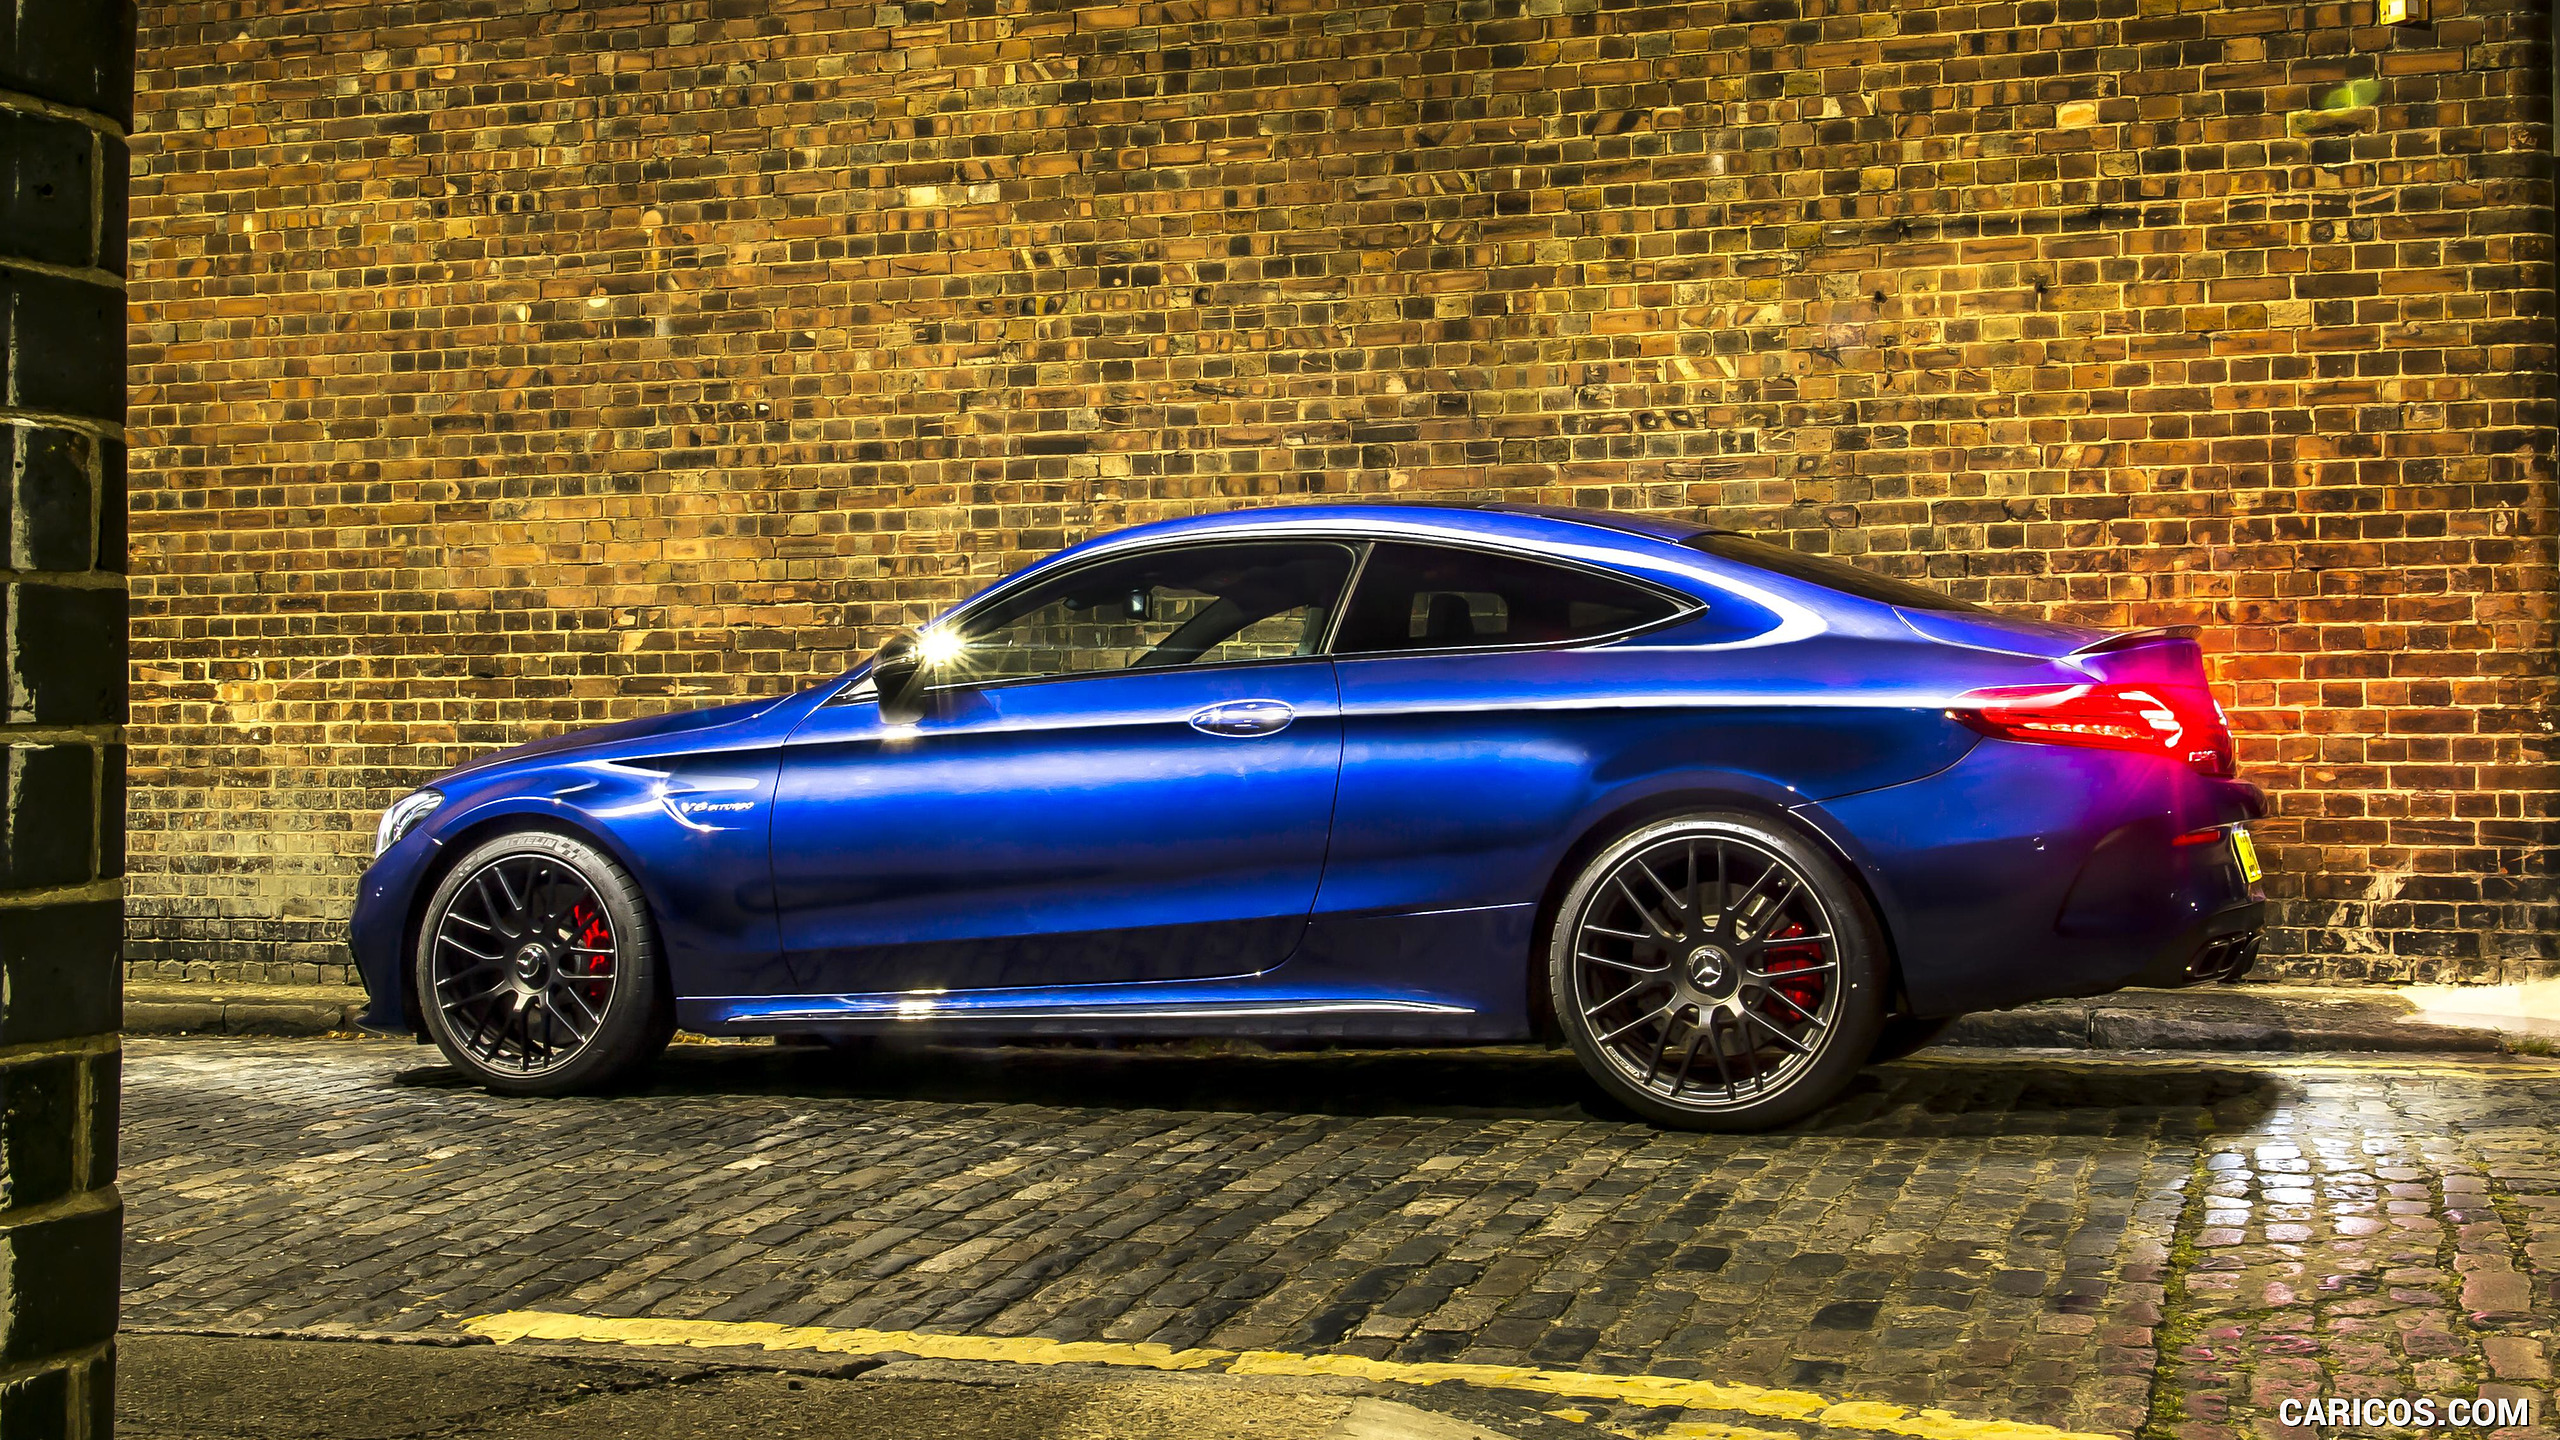 2017 Mercedes-AMG C63 S Coupe (UK-Spec) - Side, #50 of 52